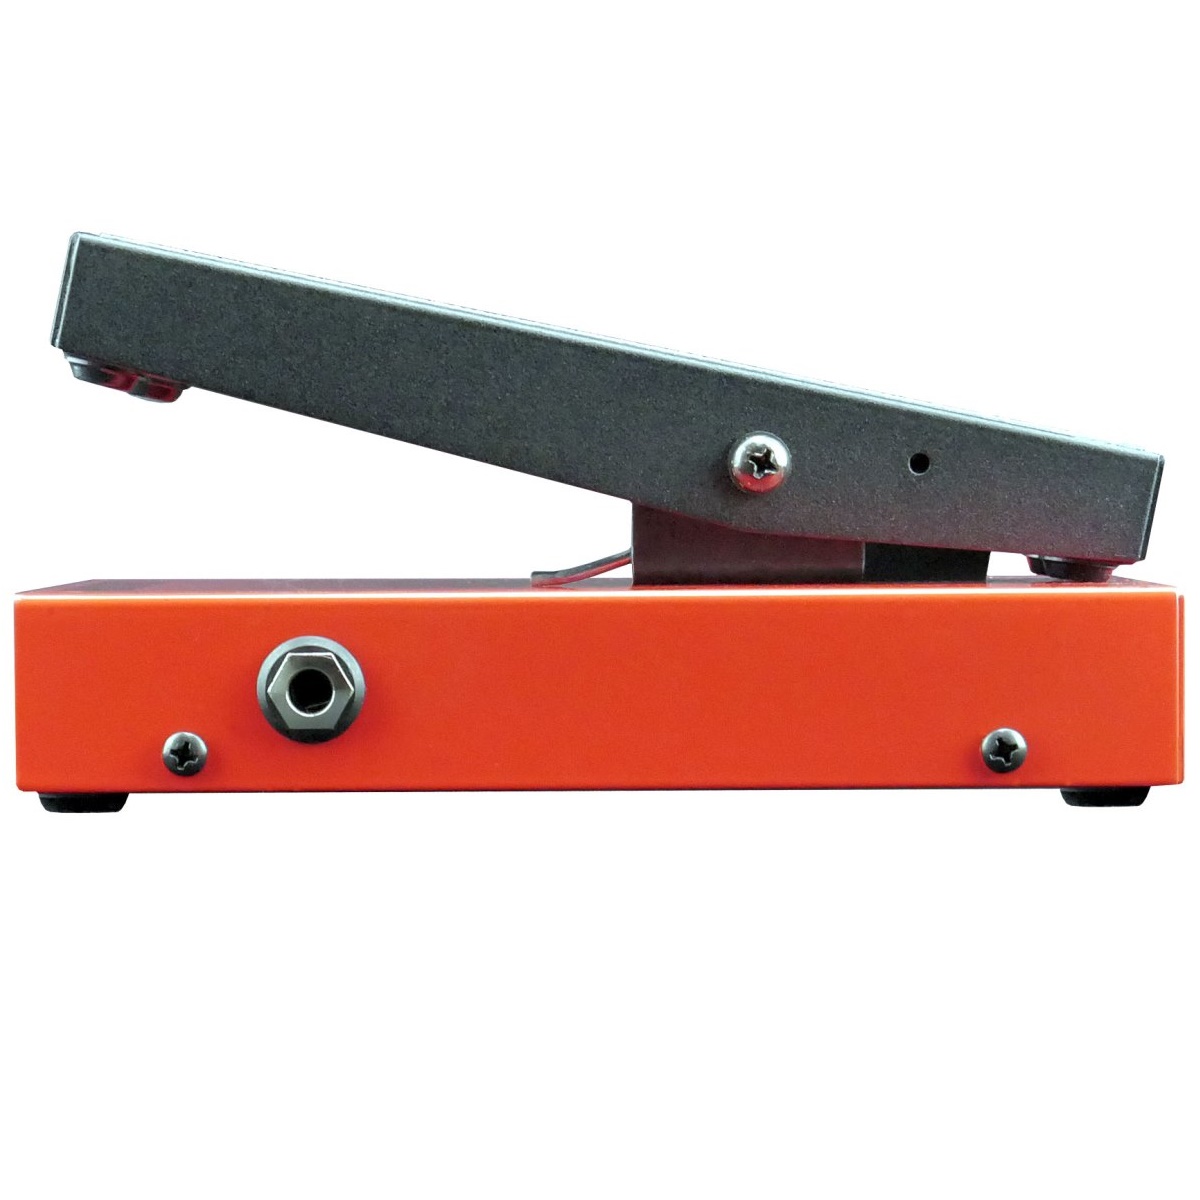 MORLEY 20 20 LEAD WAH MTLW EFFETTO A PEDALE PER CHITARRA 3